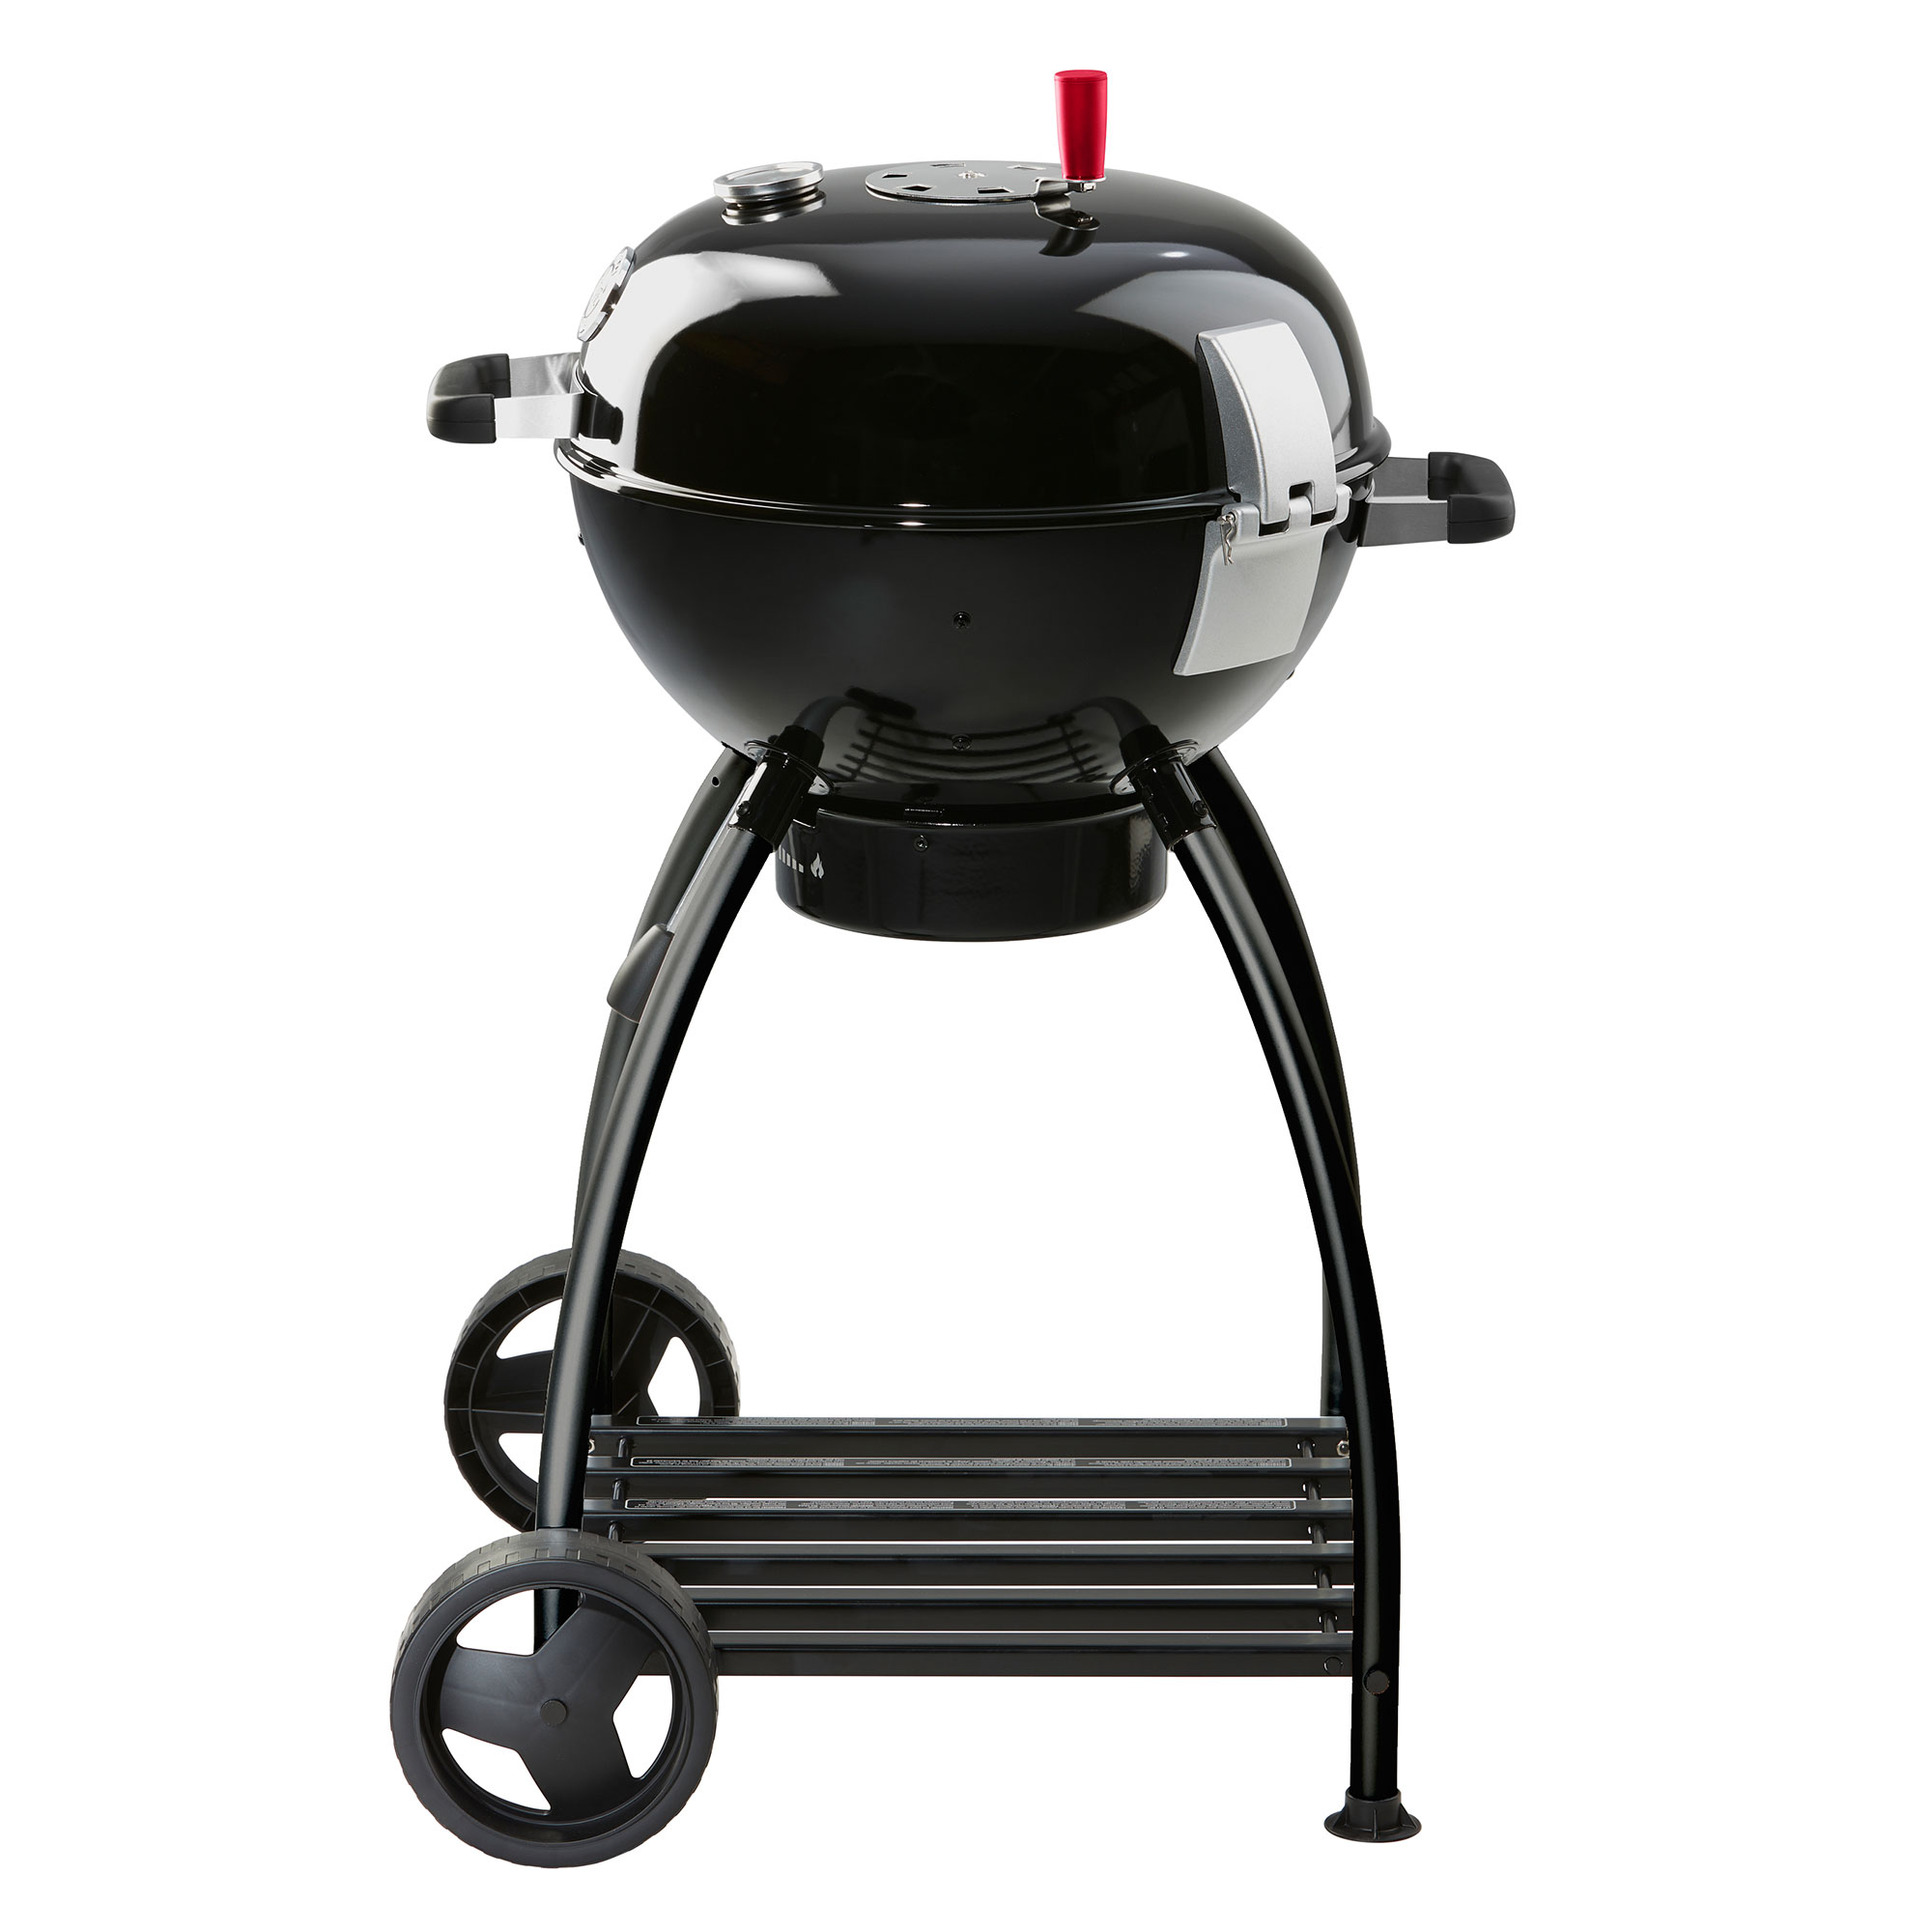 FC Bayern Edition - Charcoal Kettle Grill No.1 Sport F50 black (Ø 50 cm | 20 in.)